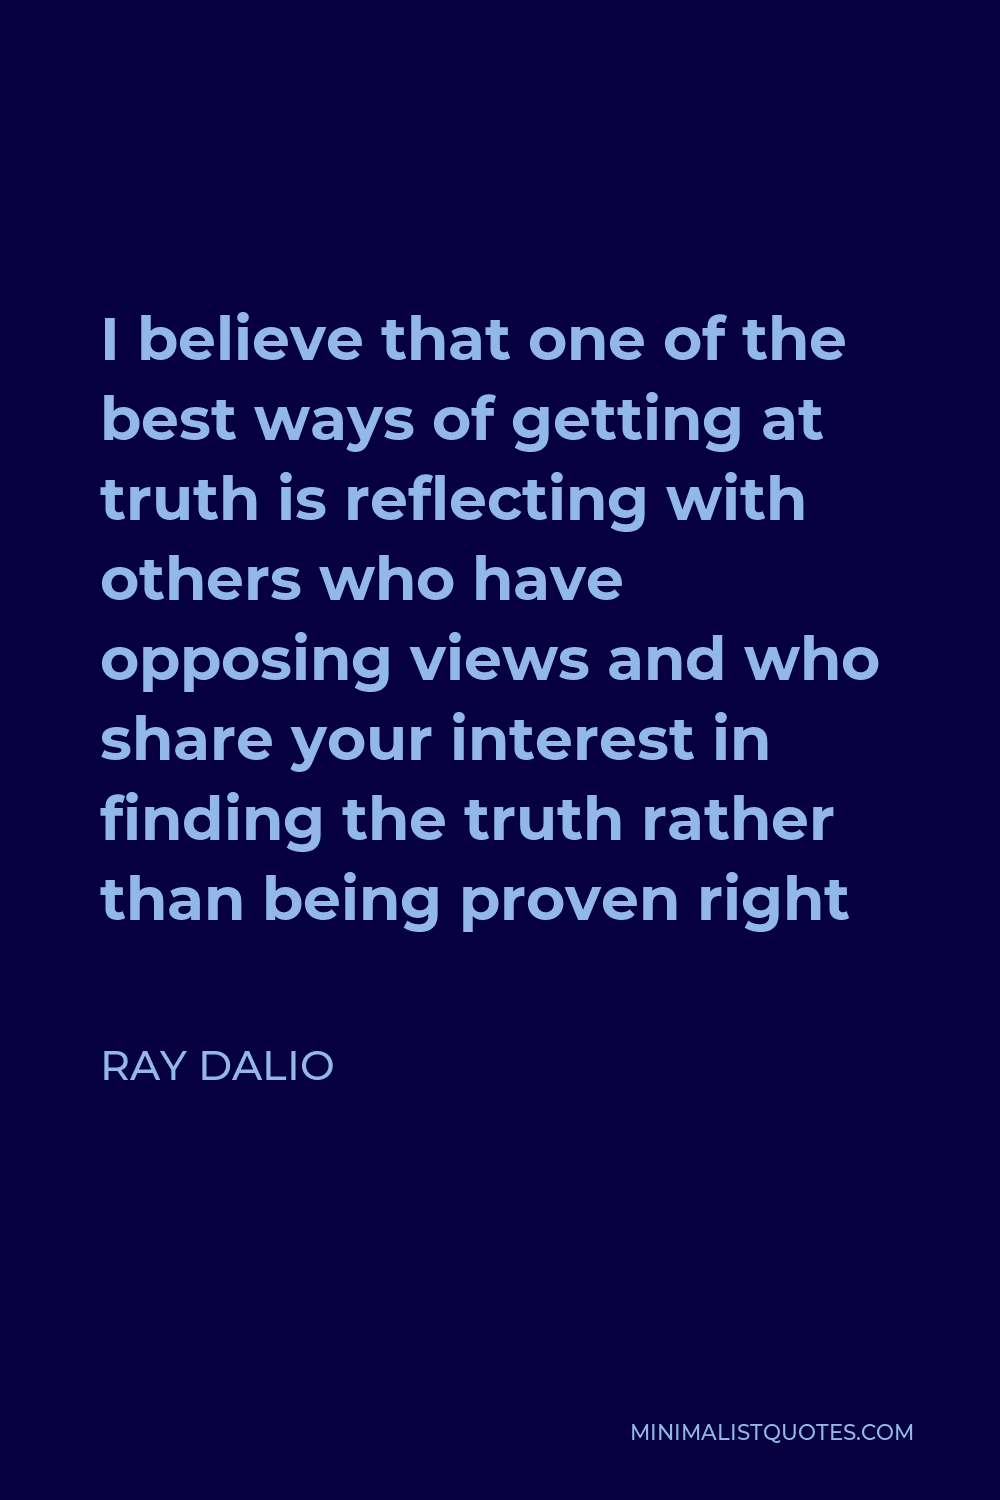 Ray Dalio Quote - I believe that one of the best ways of getting at truth is reflecting with others who have opposing views and who share your interest in finding the truth rather than being proven right